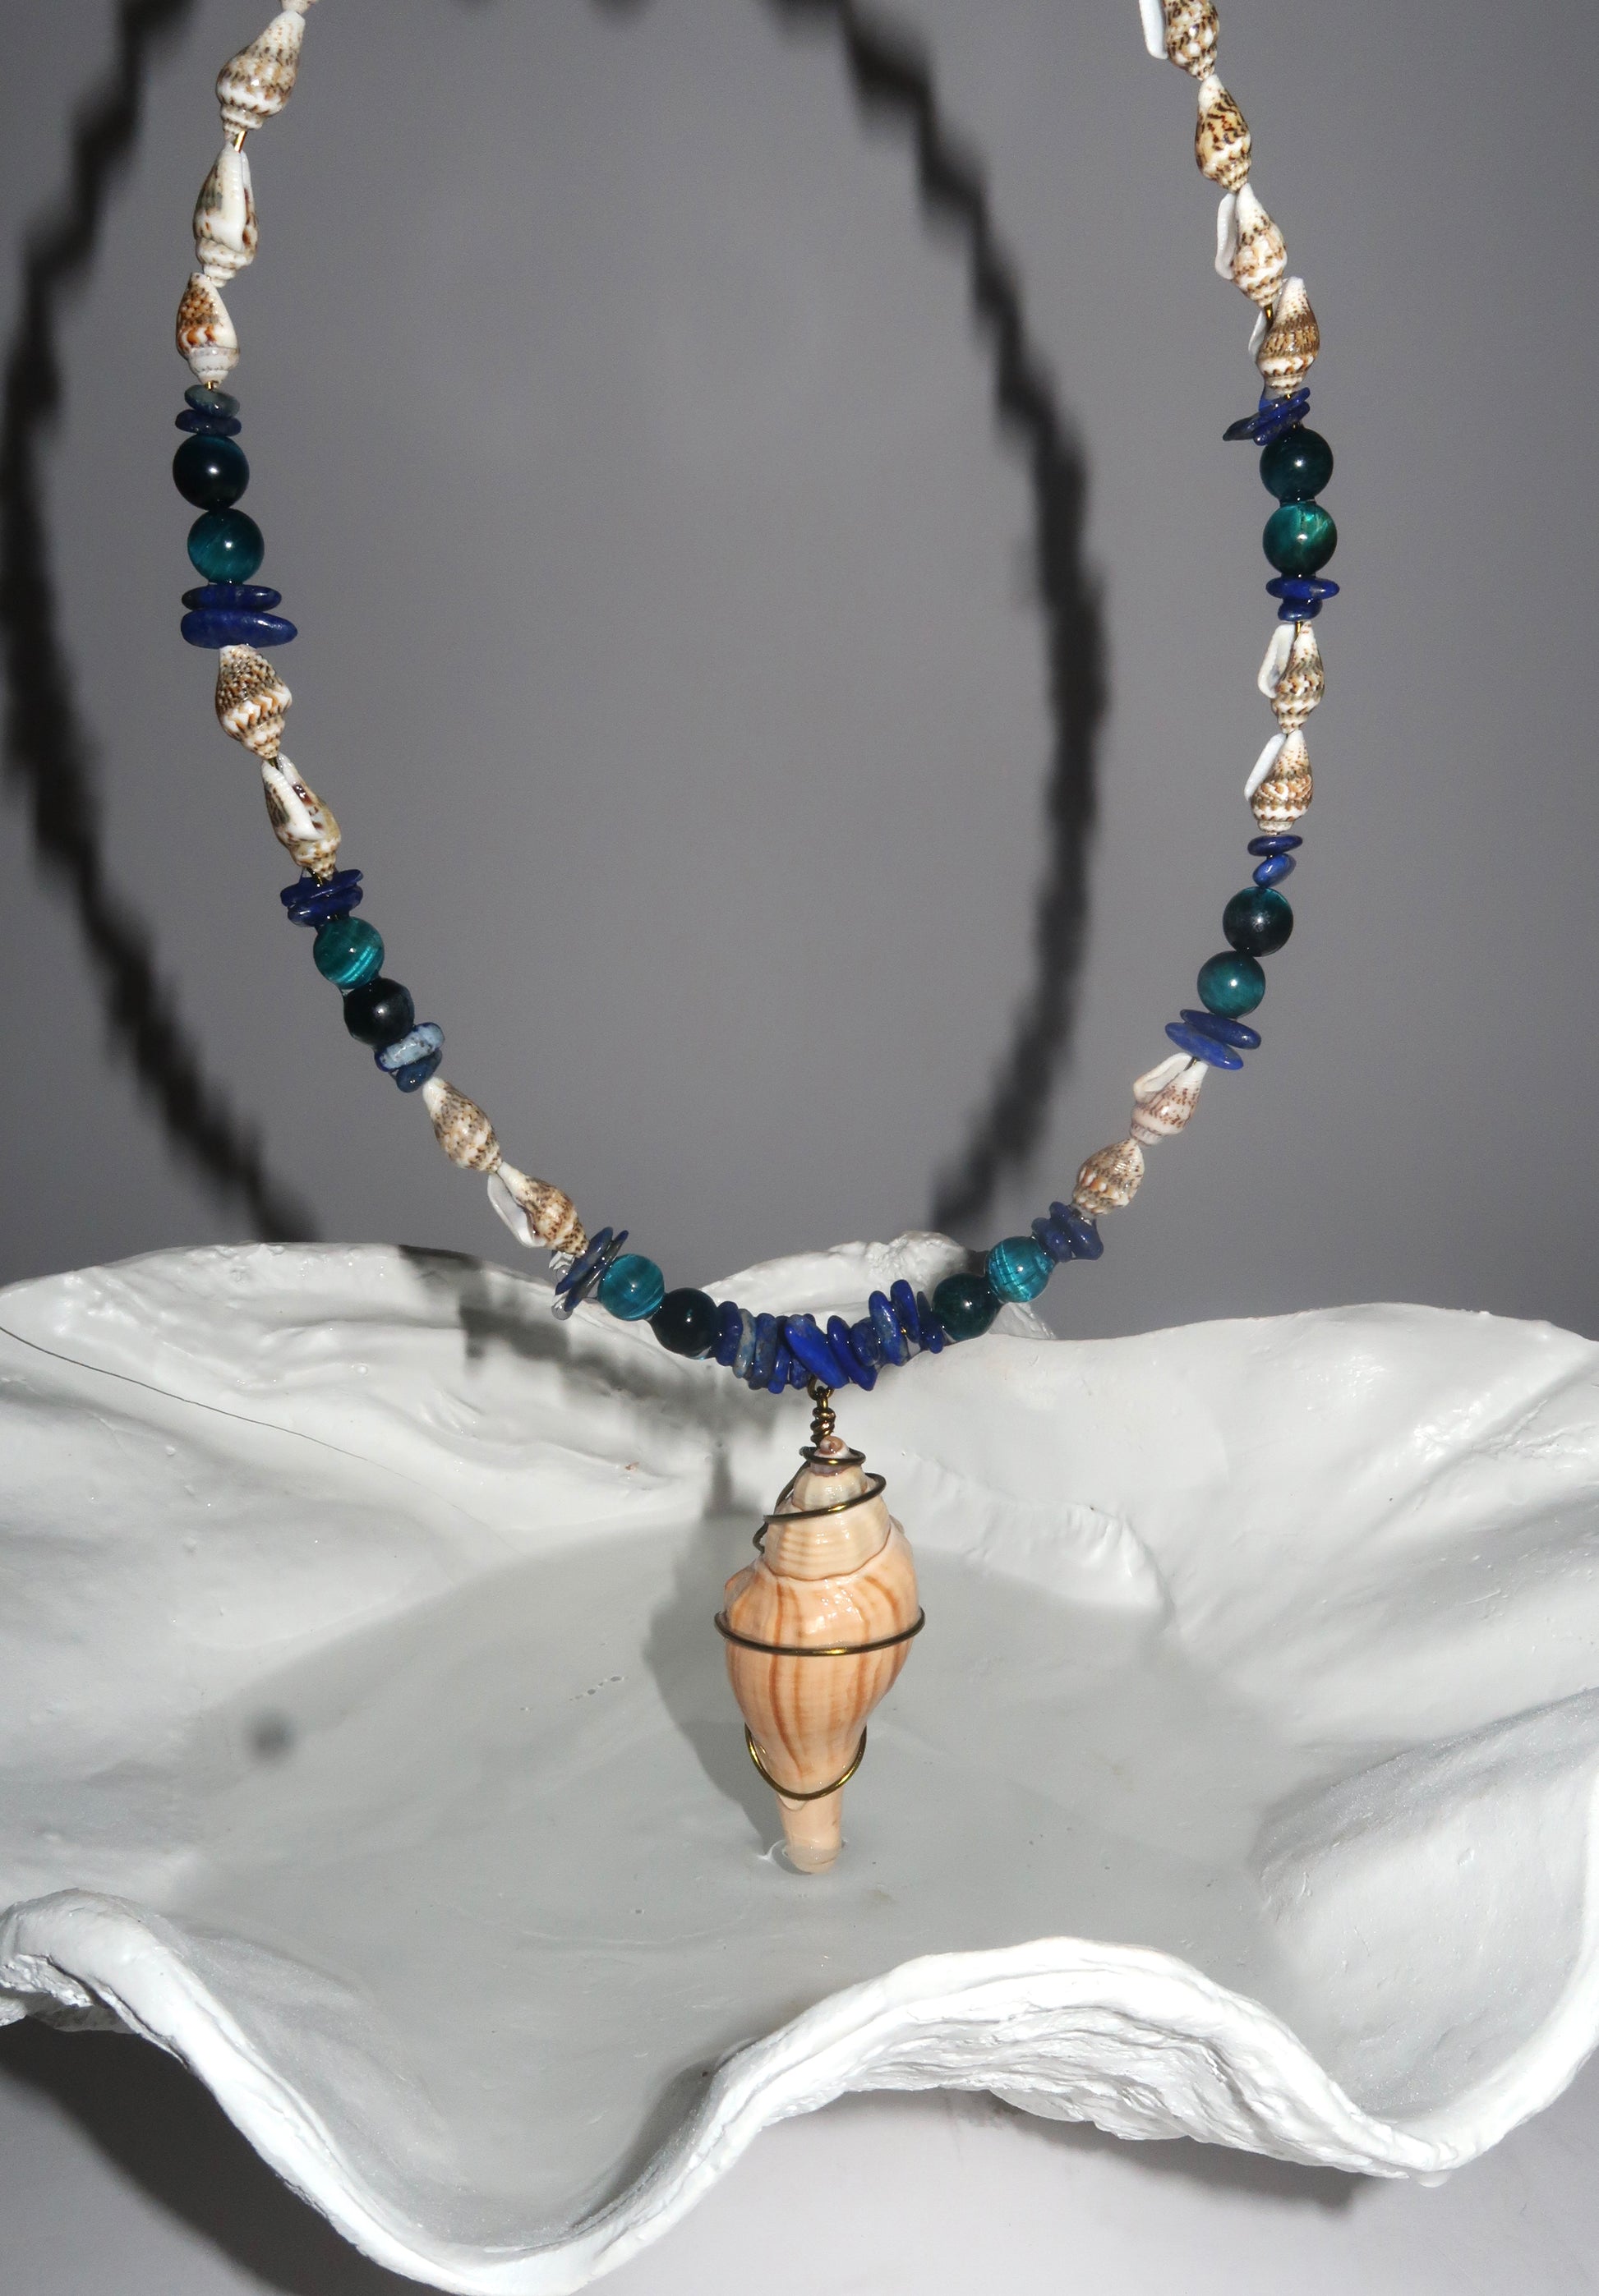 Calliope Beaded Necklace: How To Bead A Necklace 